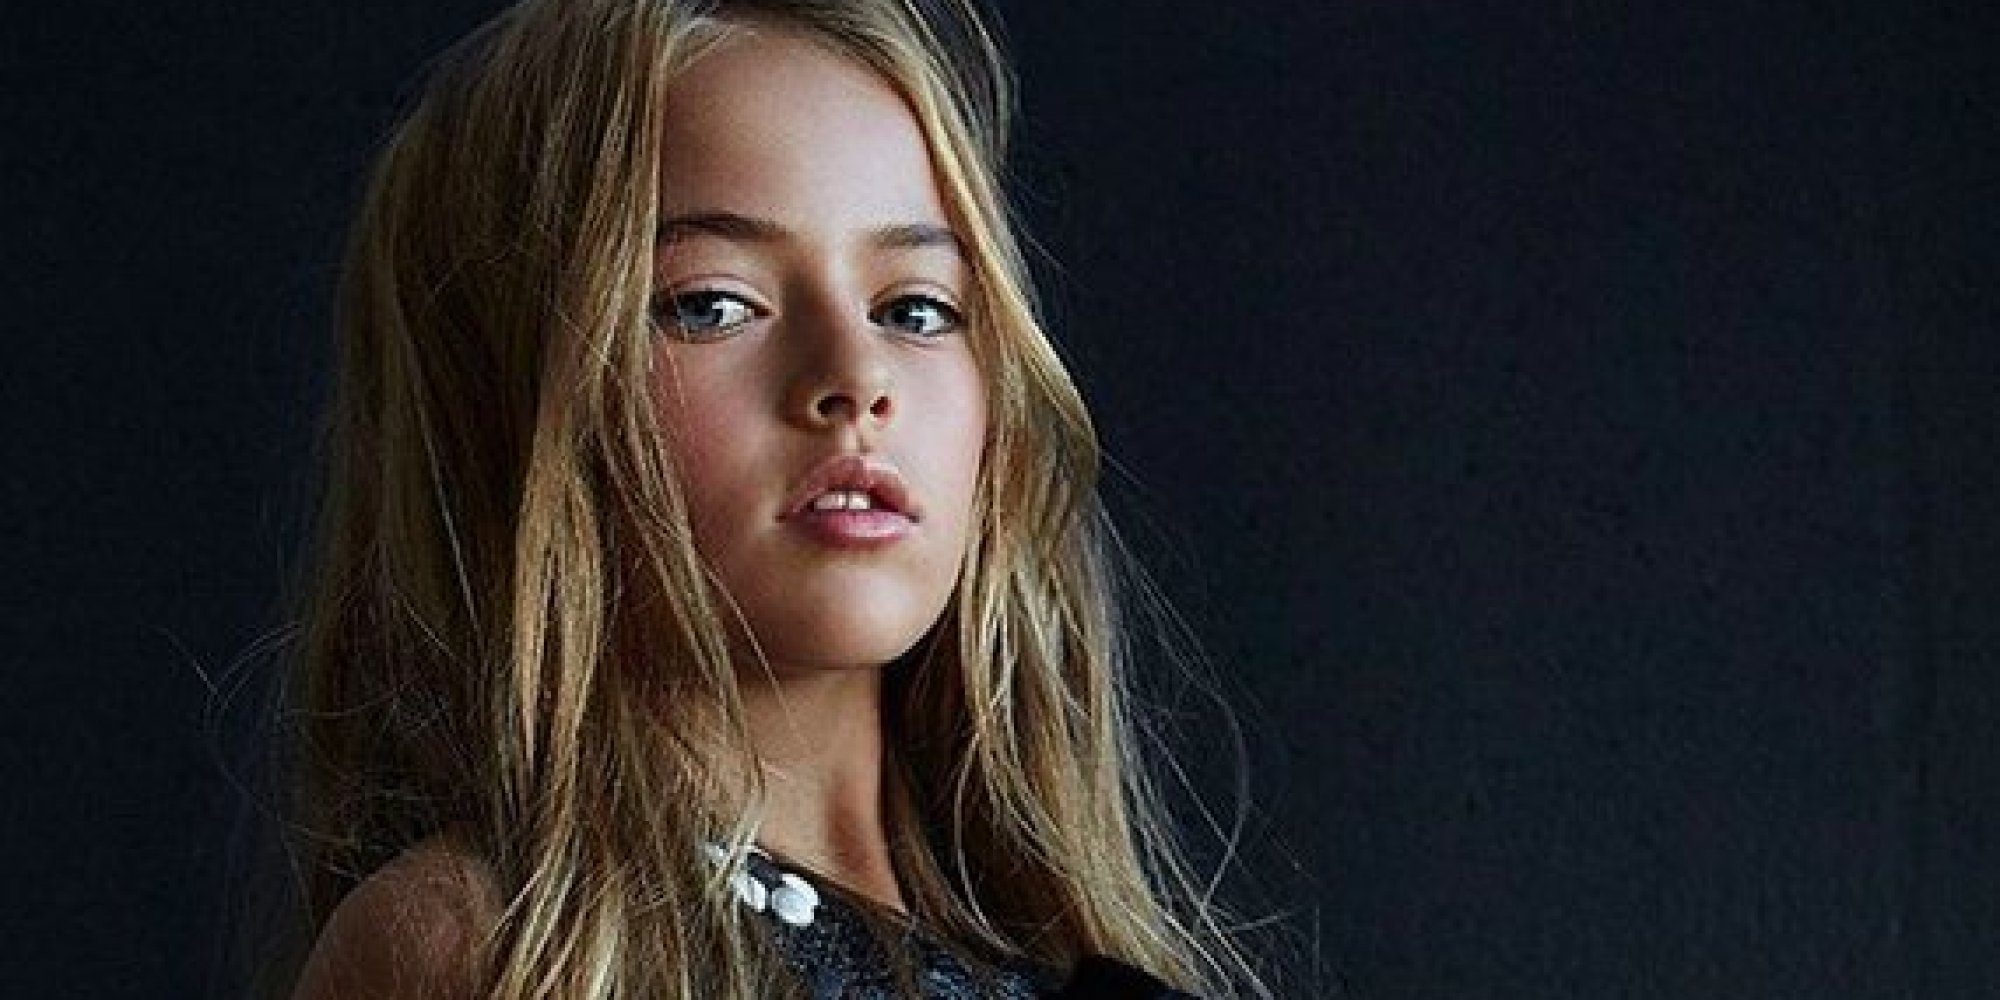 Kristina Pimenova Lands Major Modelling Contract At 10 Years Old 5150